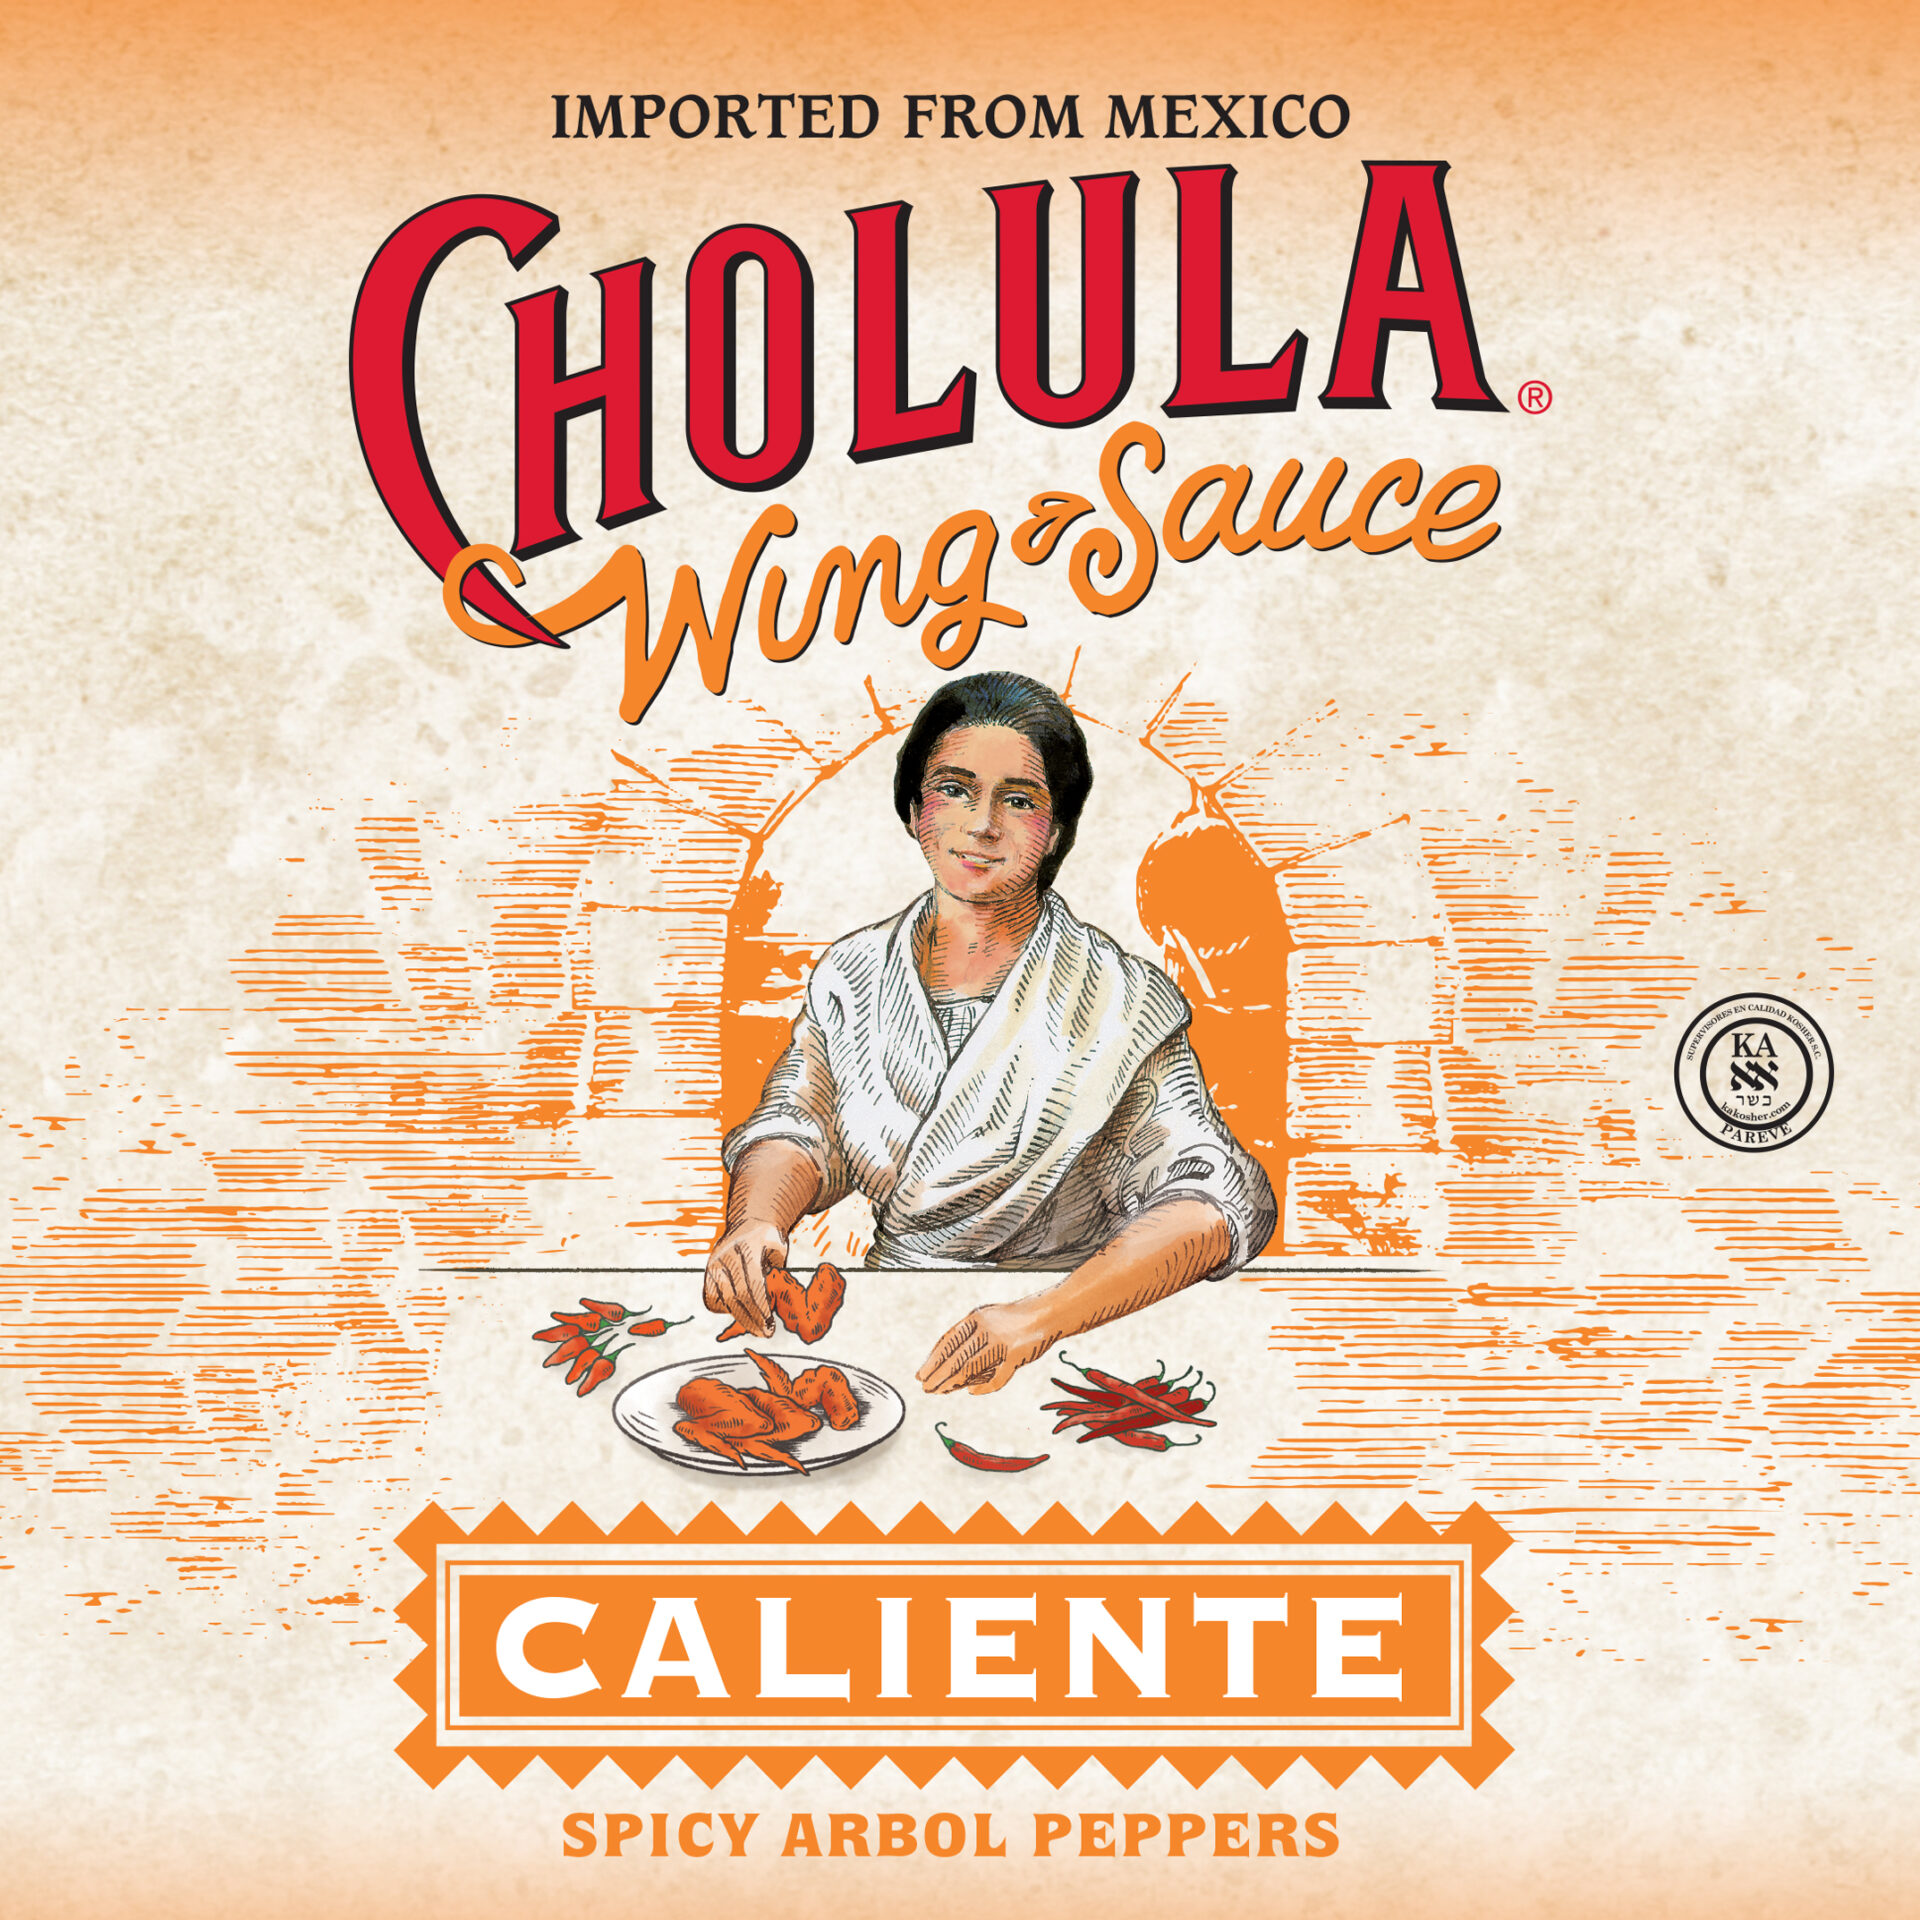 You are currently viewing Cholula